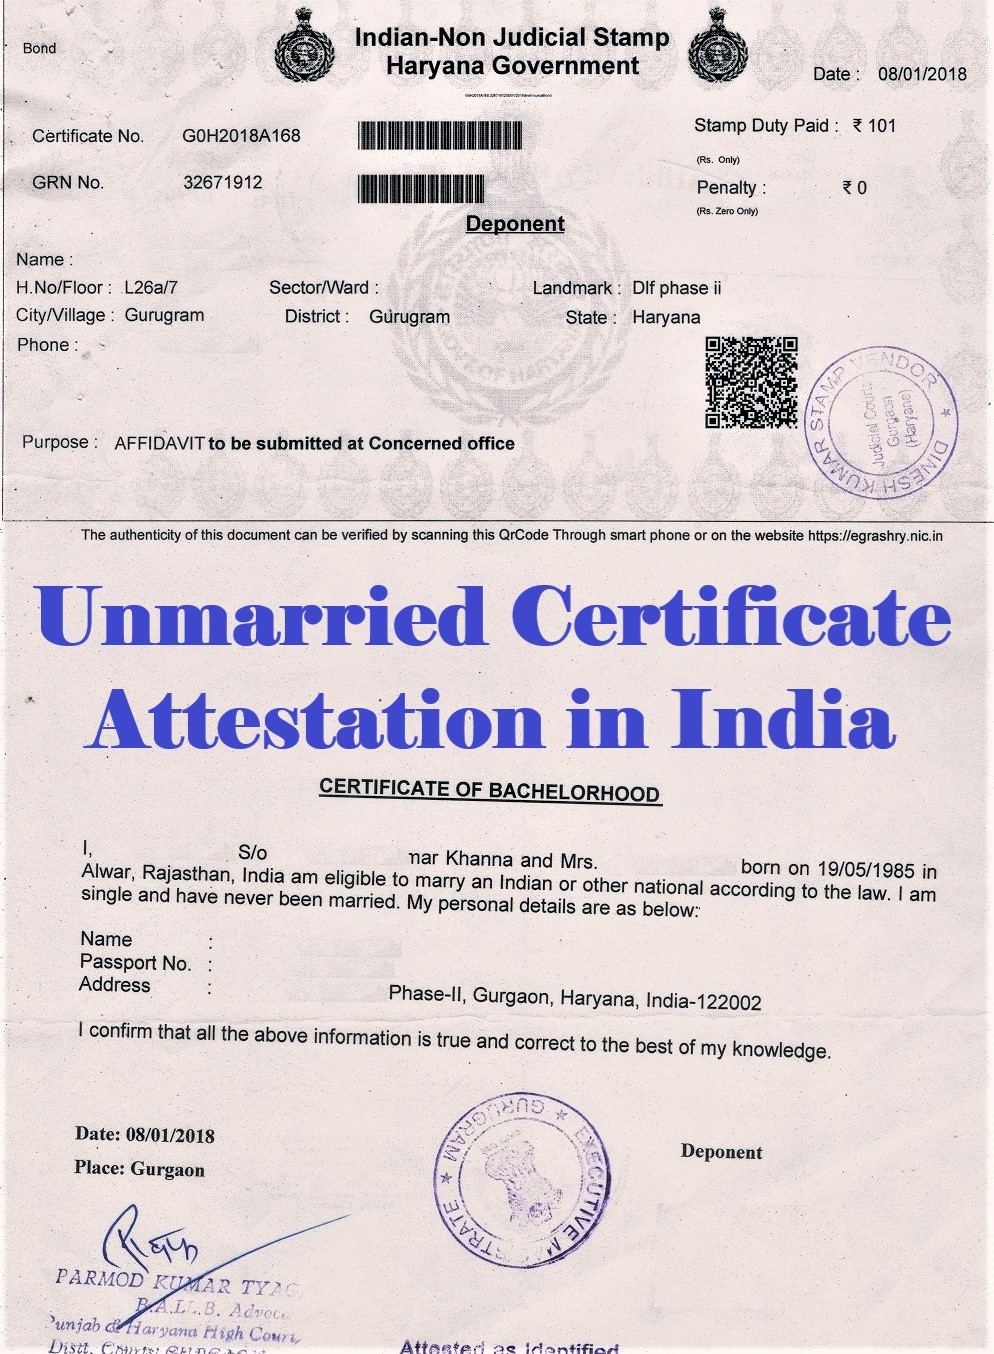 Unmarried Certificate Attestation from Montenegro Embassy